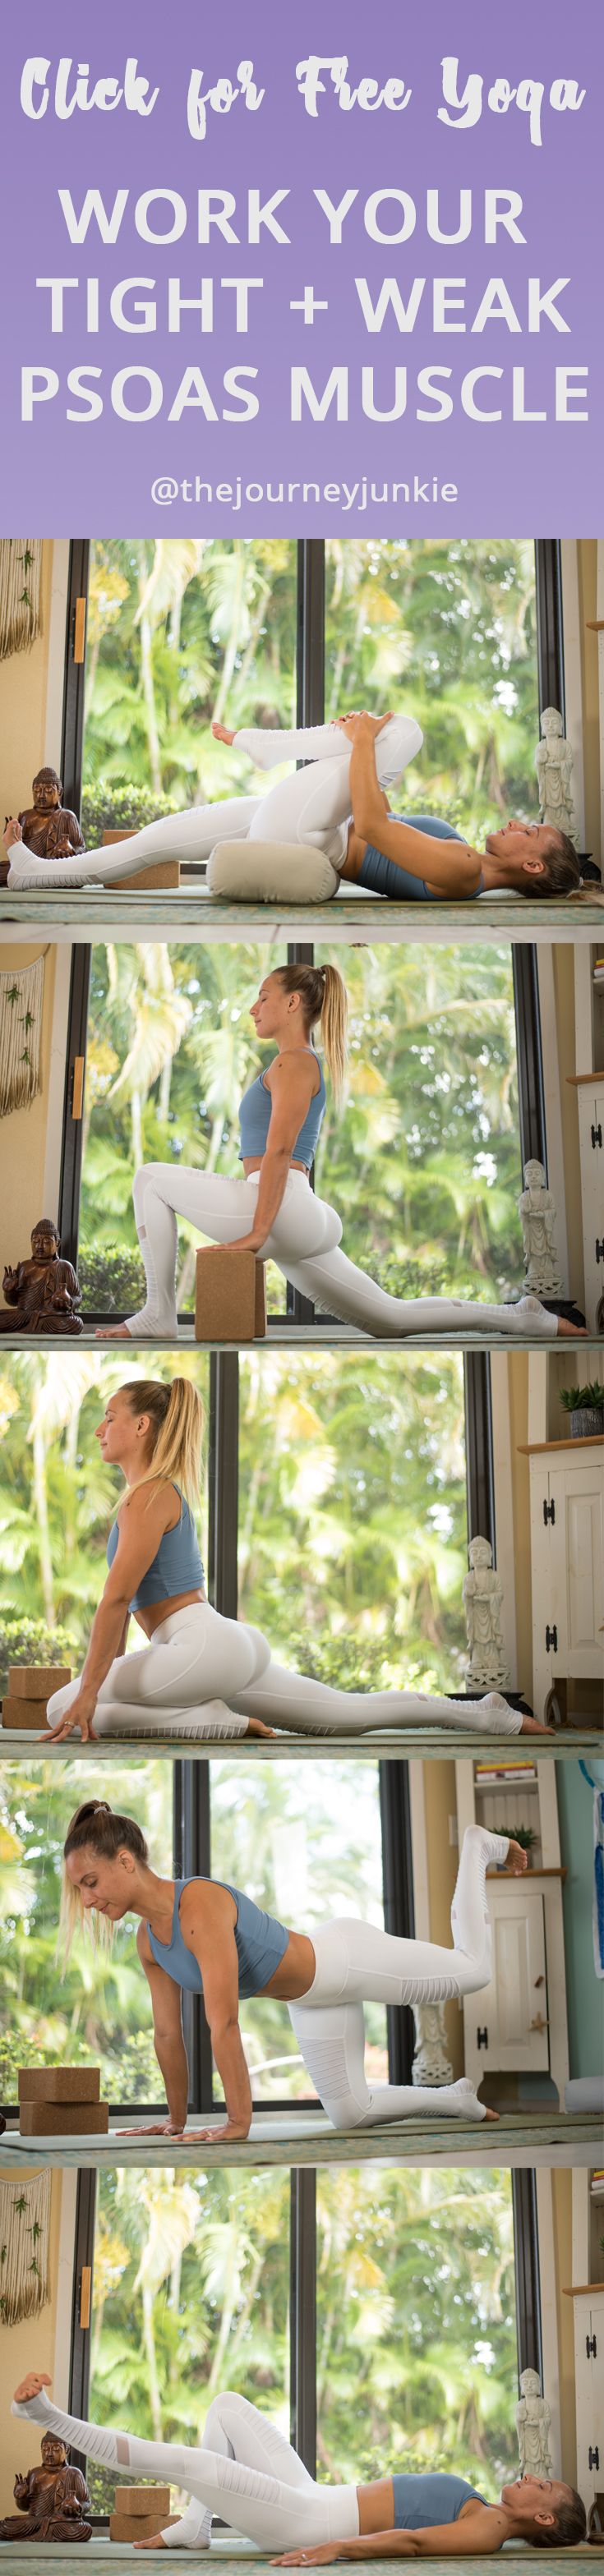 Yoga Flow for a Stressed Out Psoas Muscle